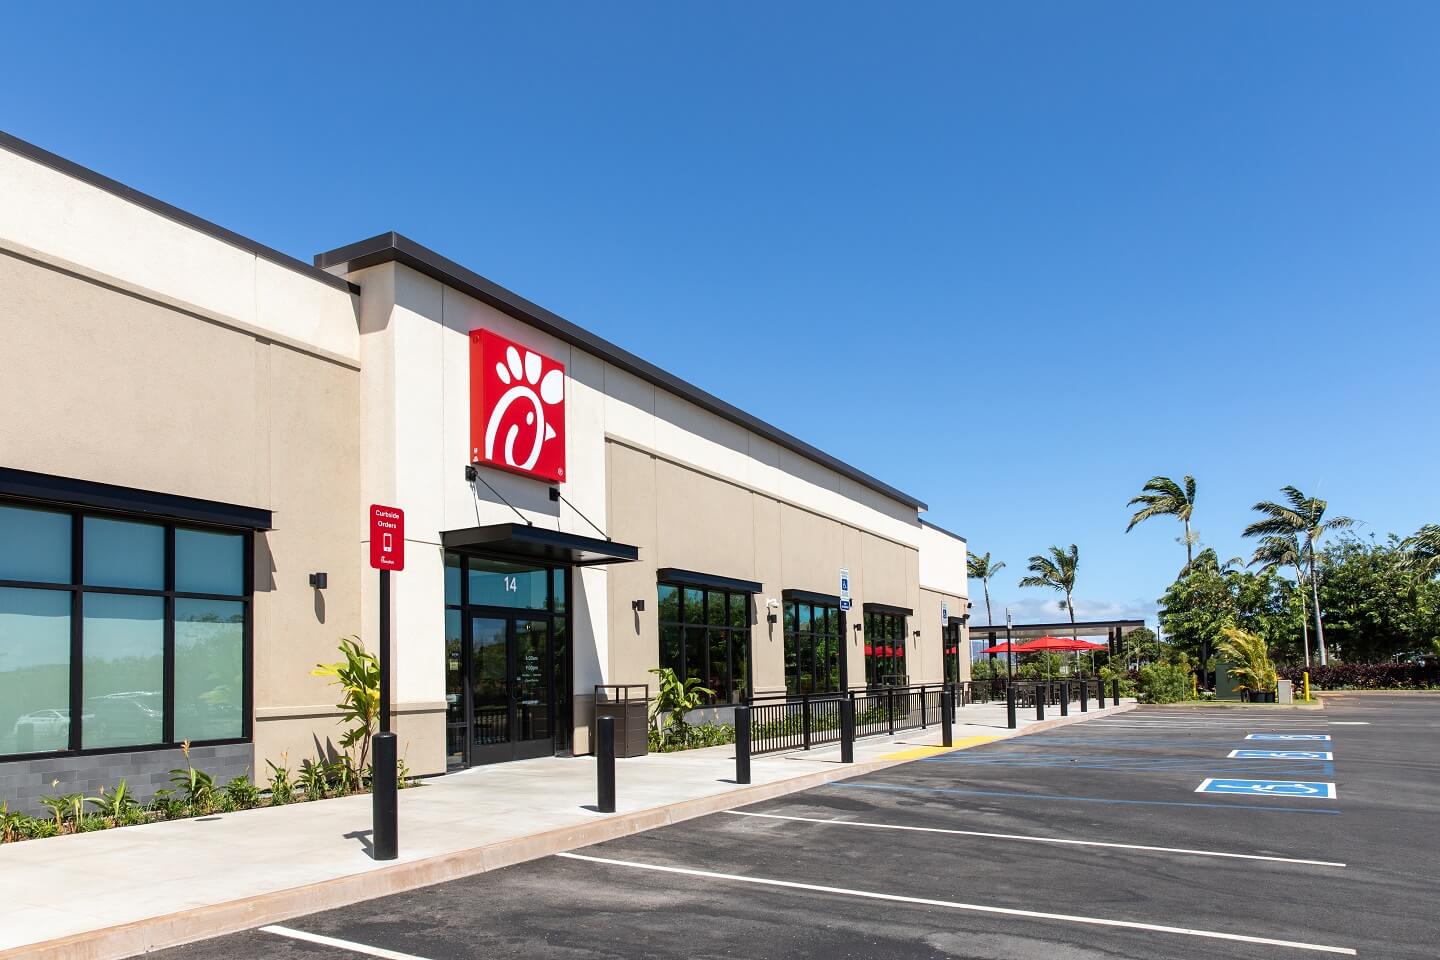 Exterior of Chick-fil-A Kahului in Maui.